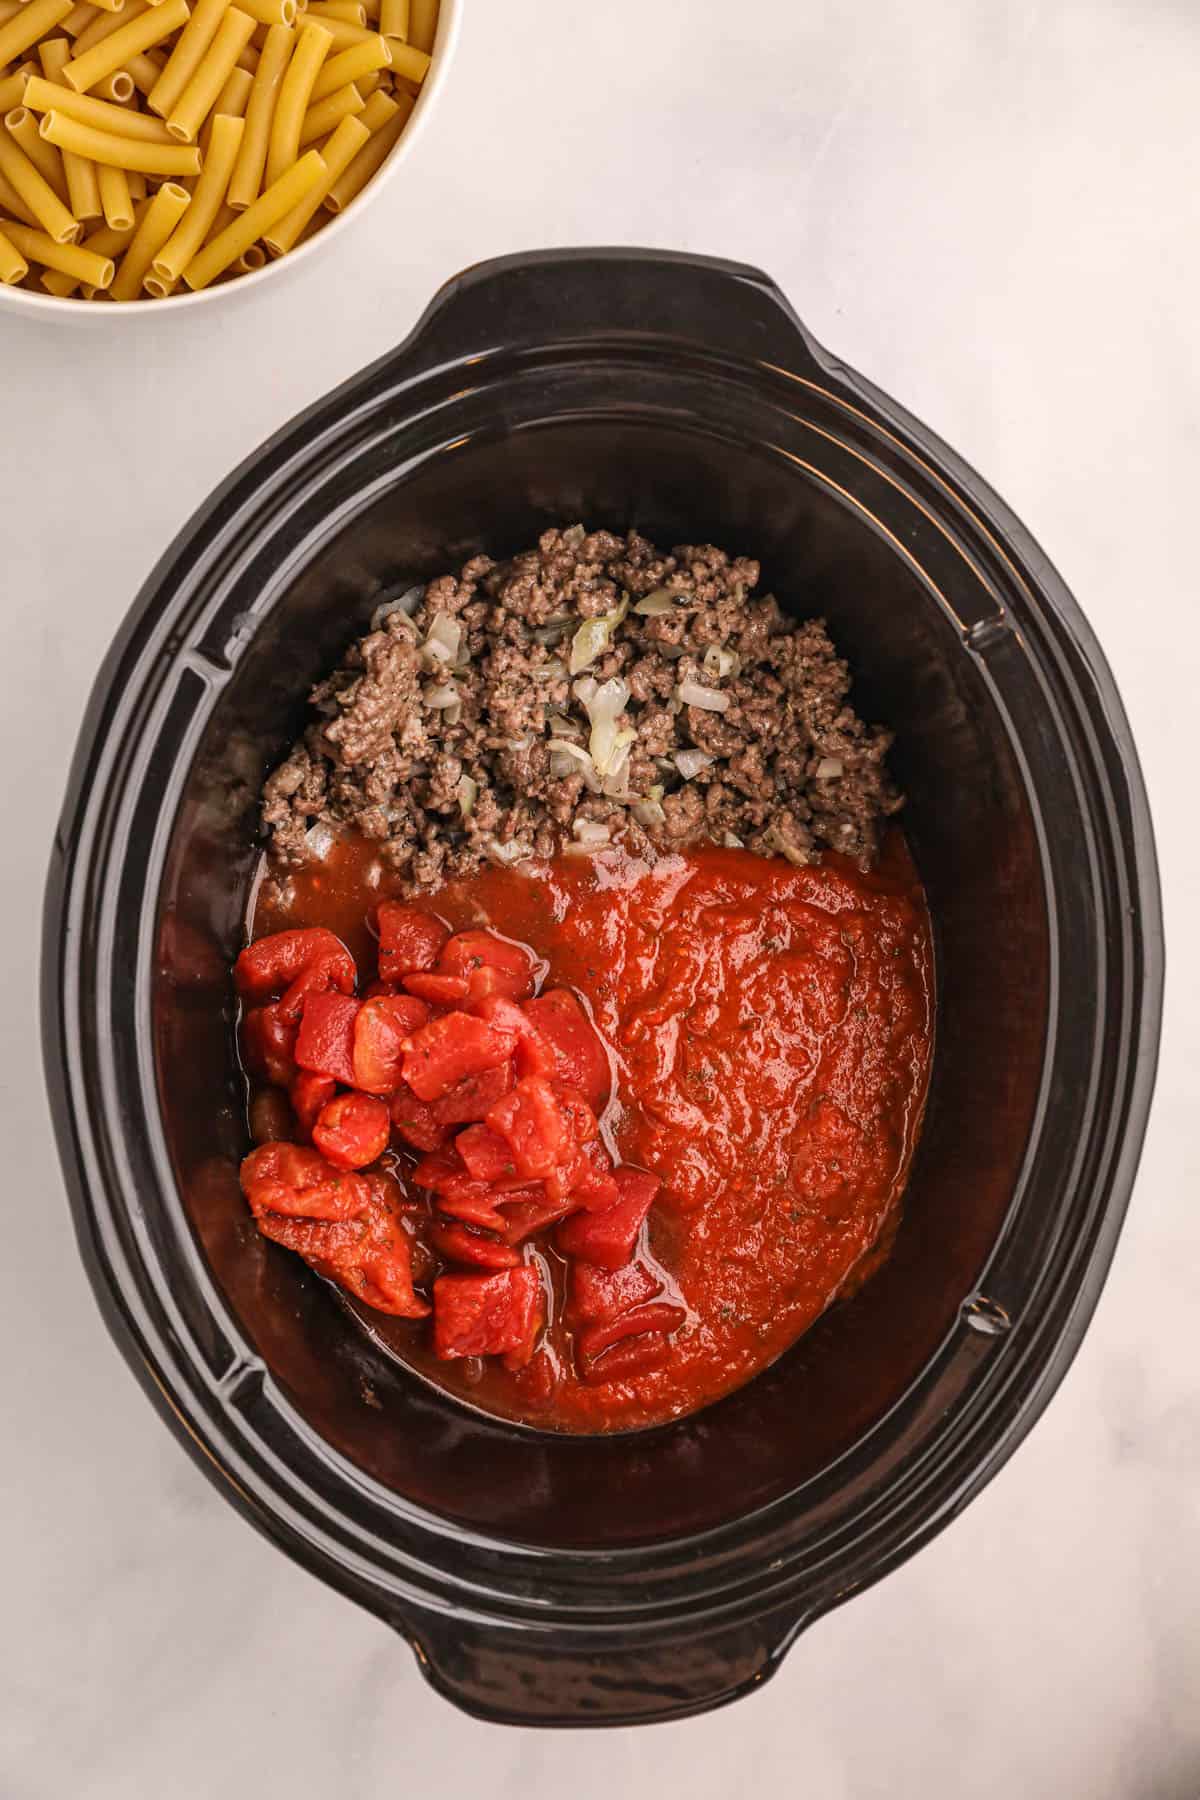 Adding tomato pasta, marinara sauce, and cooked ground beef to a crock pot.